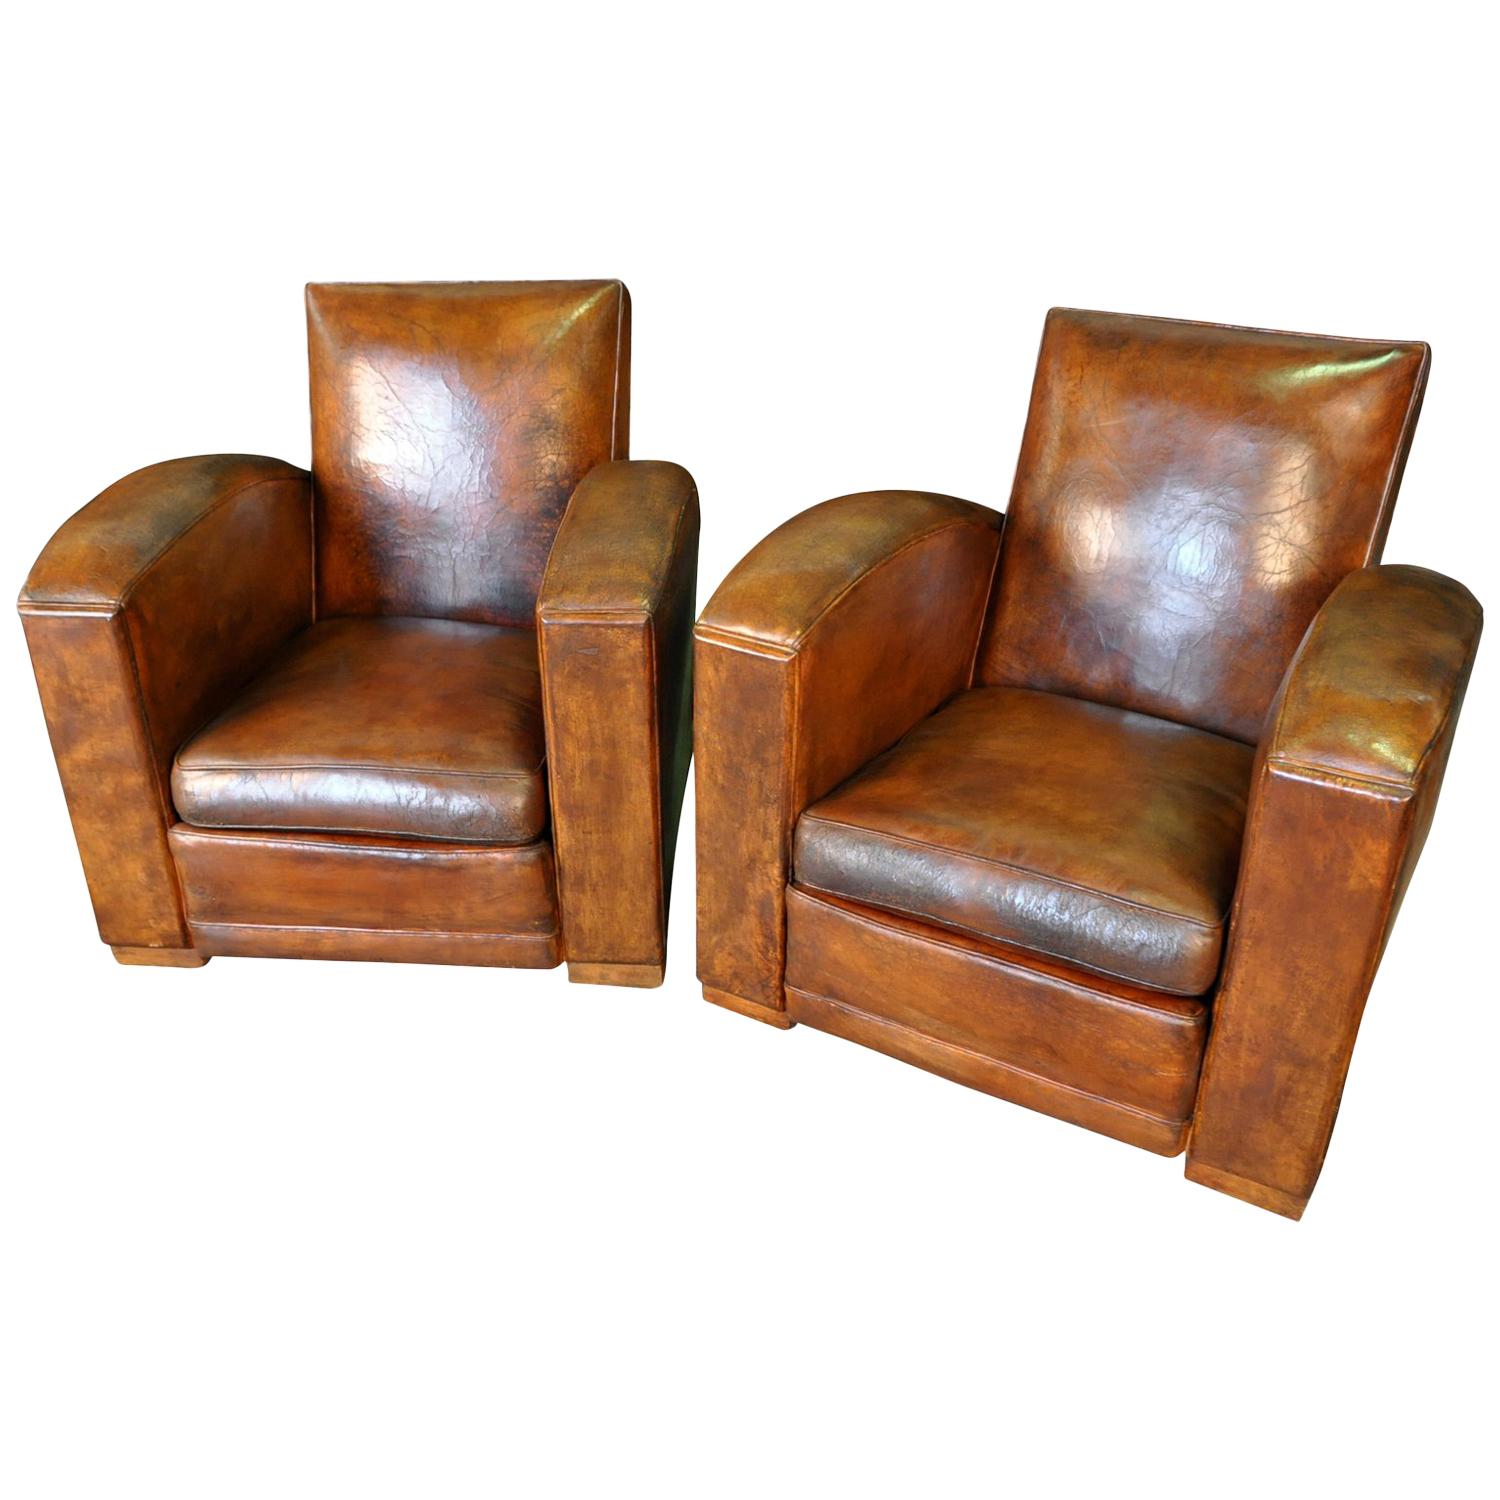 Pair of French Art Deco Leather Club Chairs